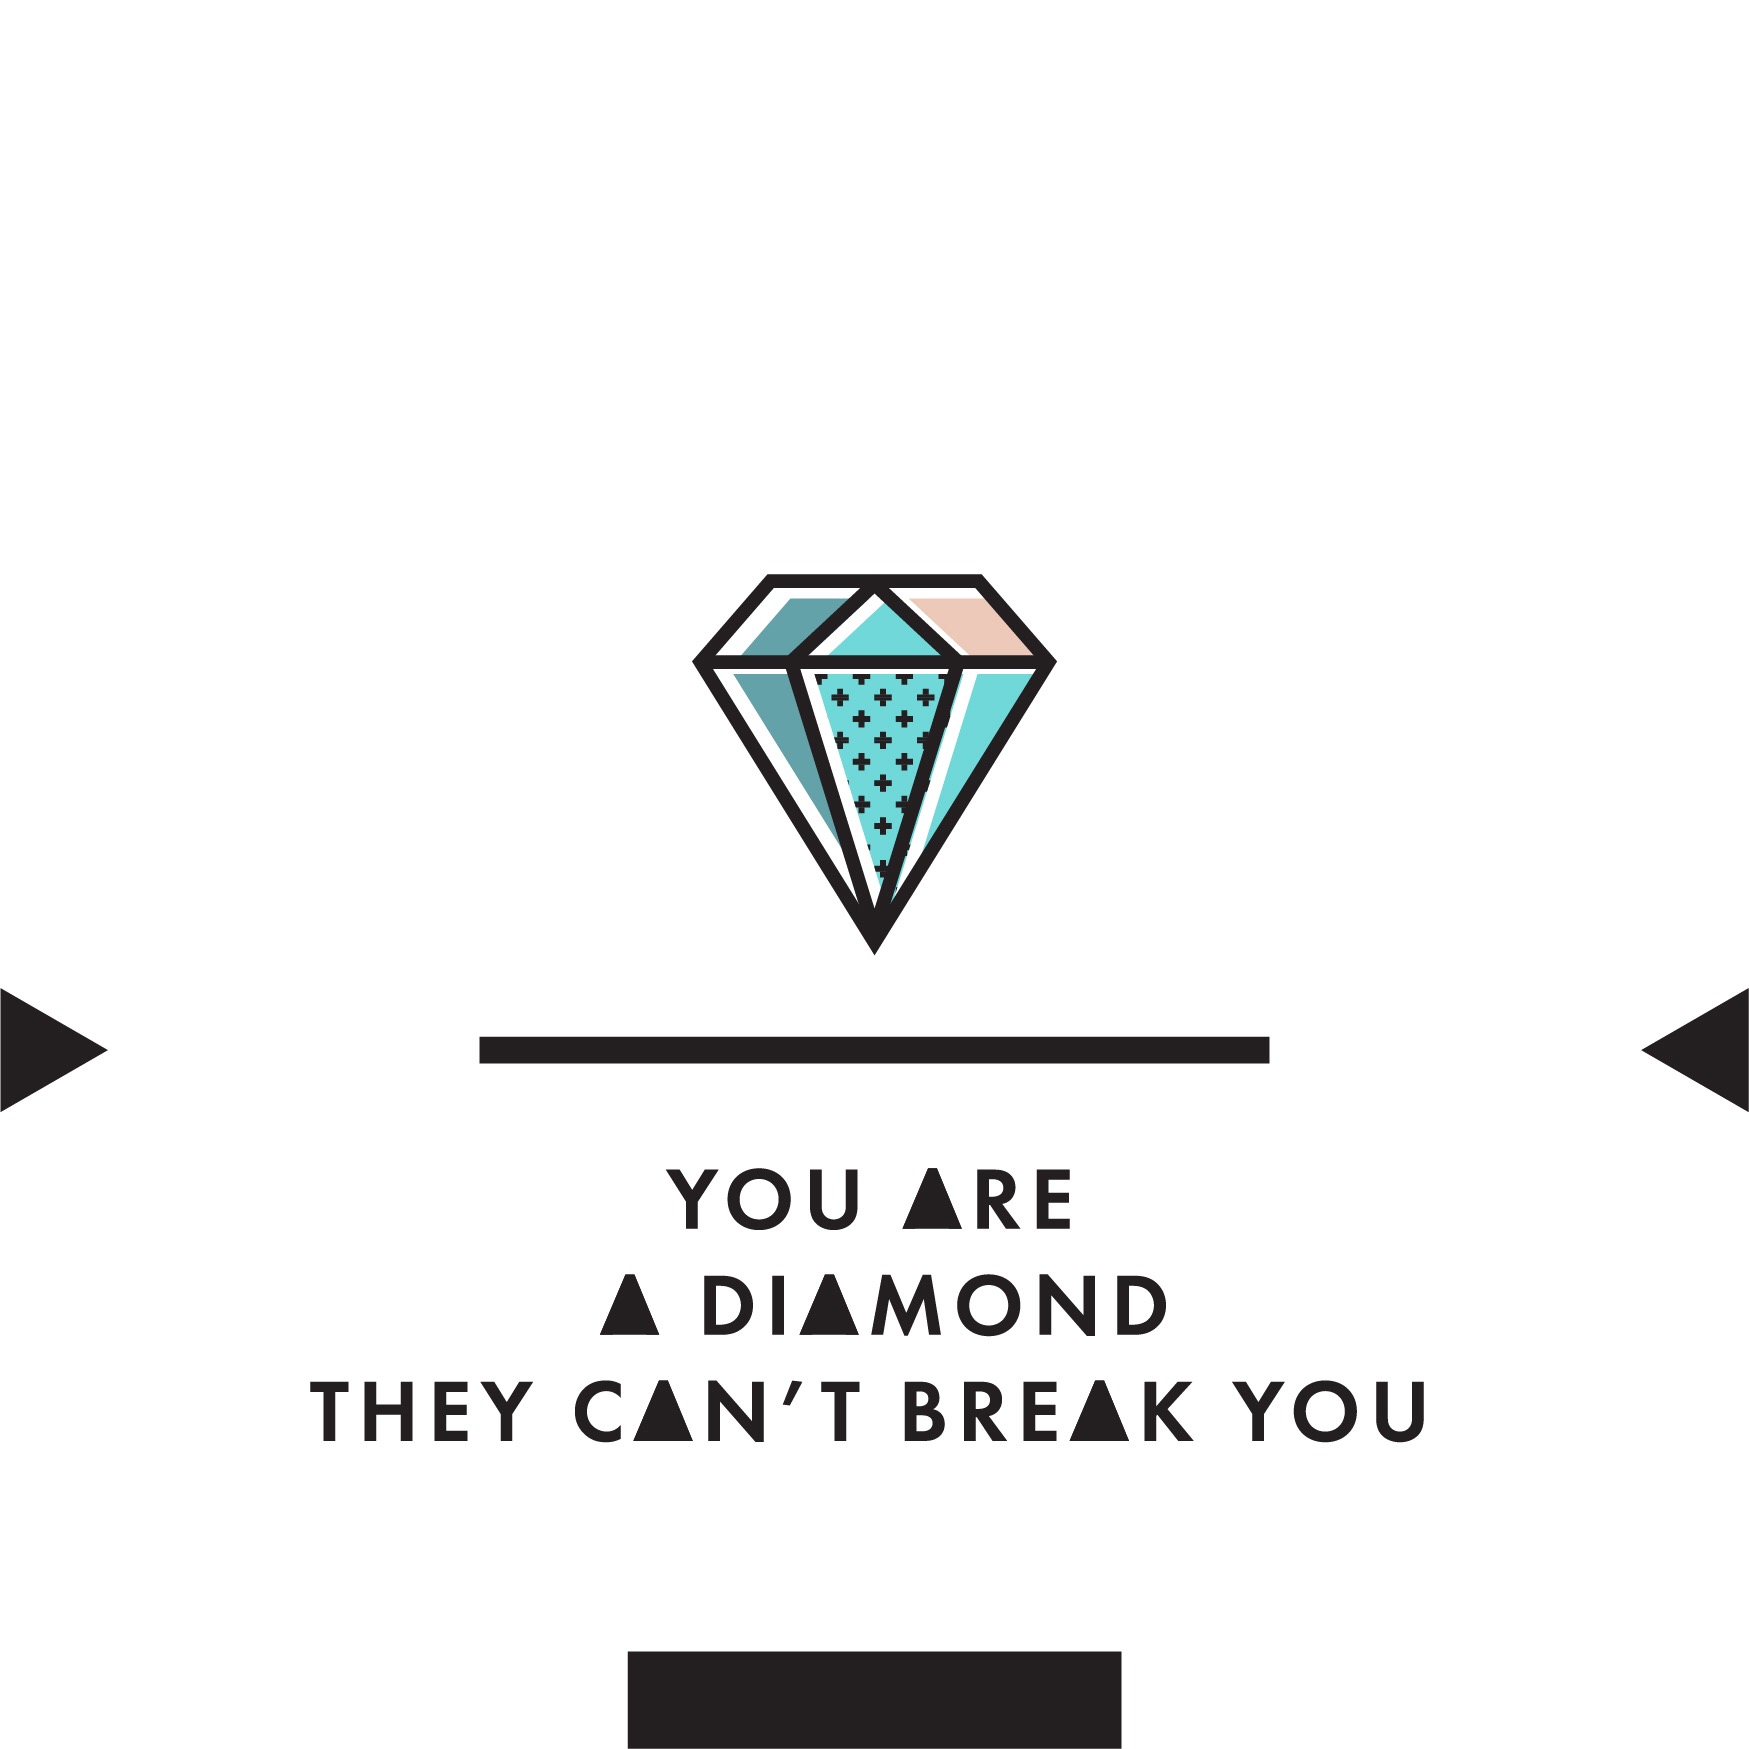 #diamond #wallpaper #background #quotes&sayings #iphone - Illustration - HD Wallpaper 